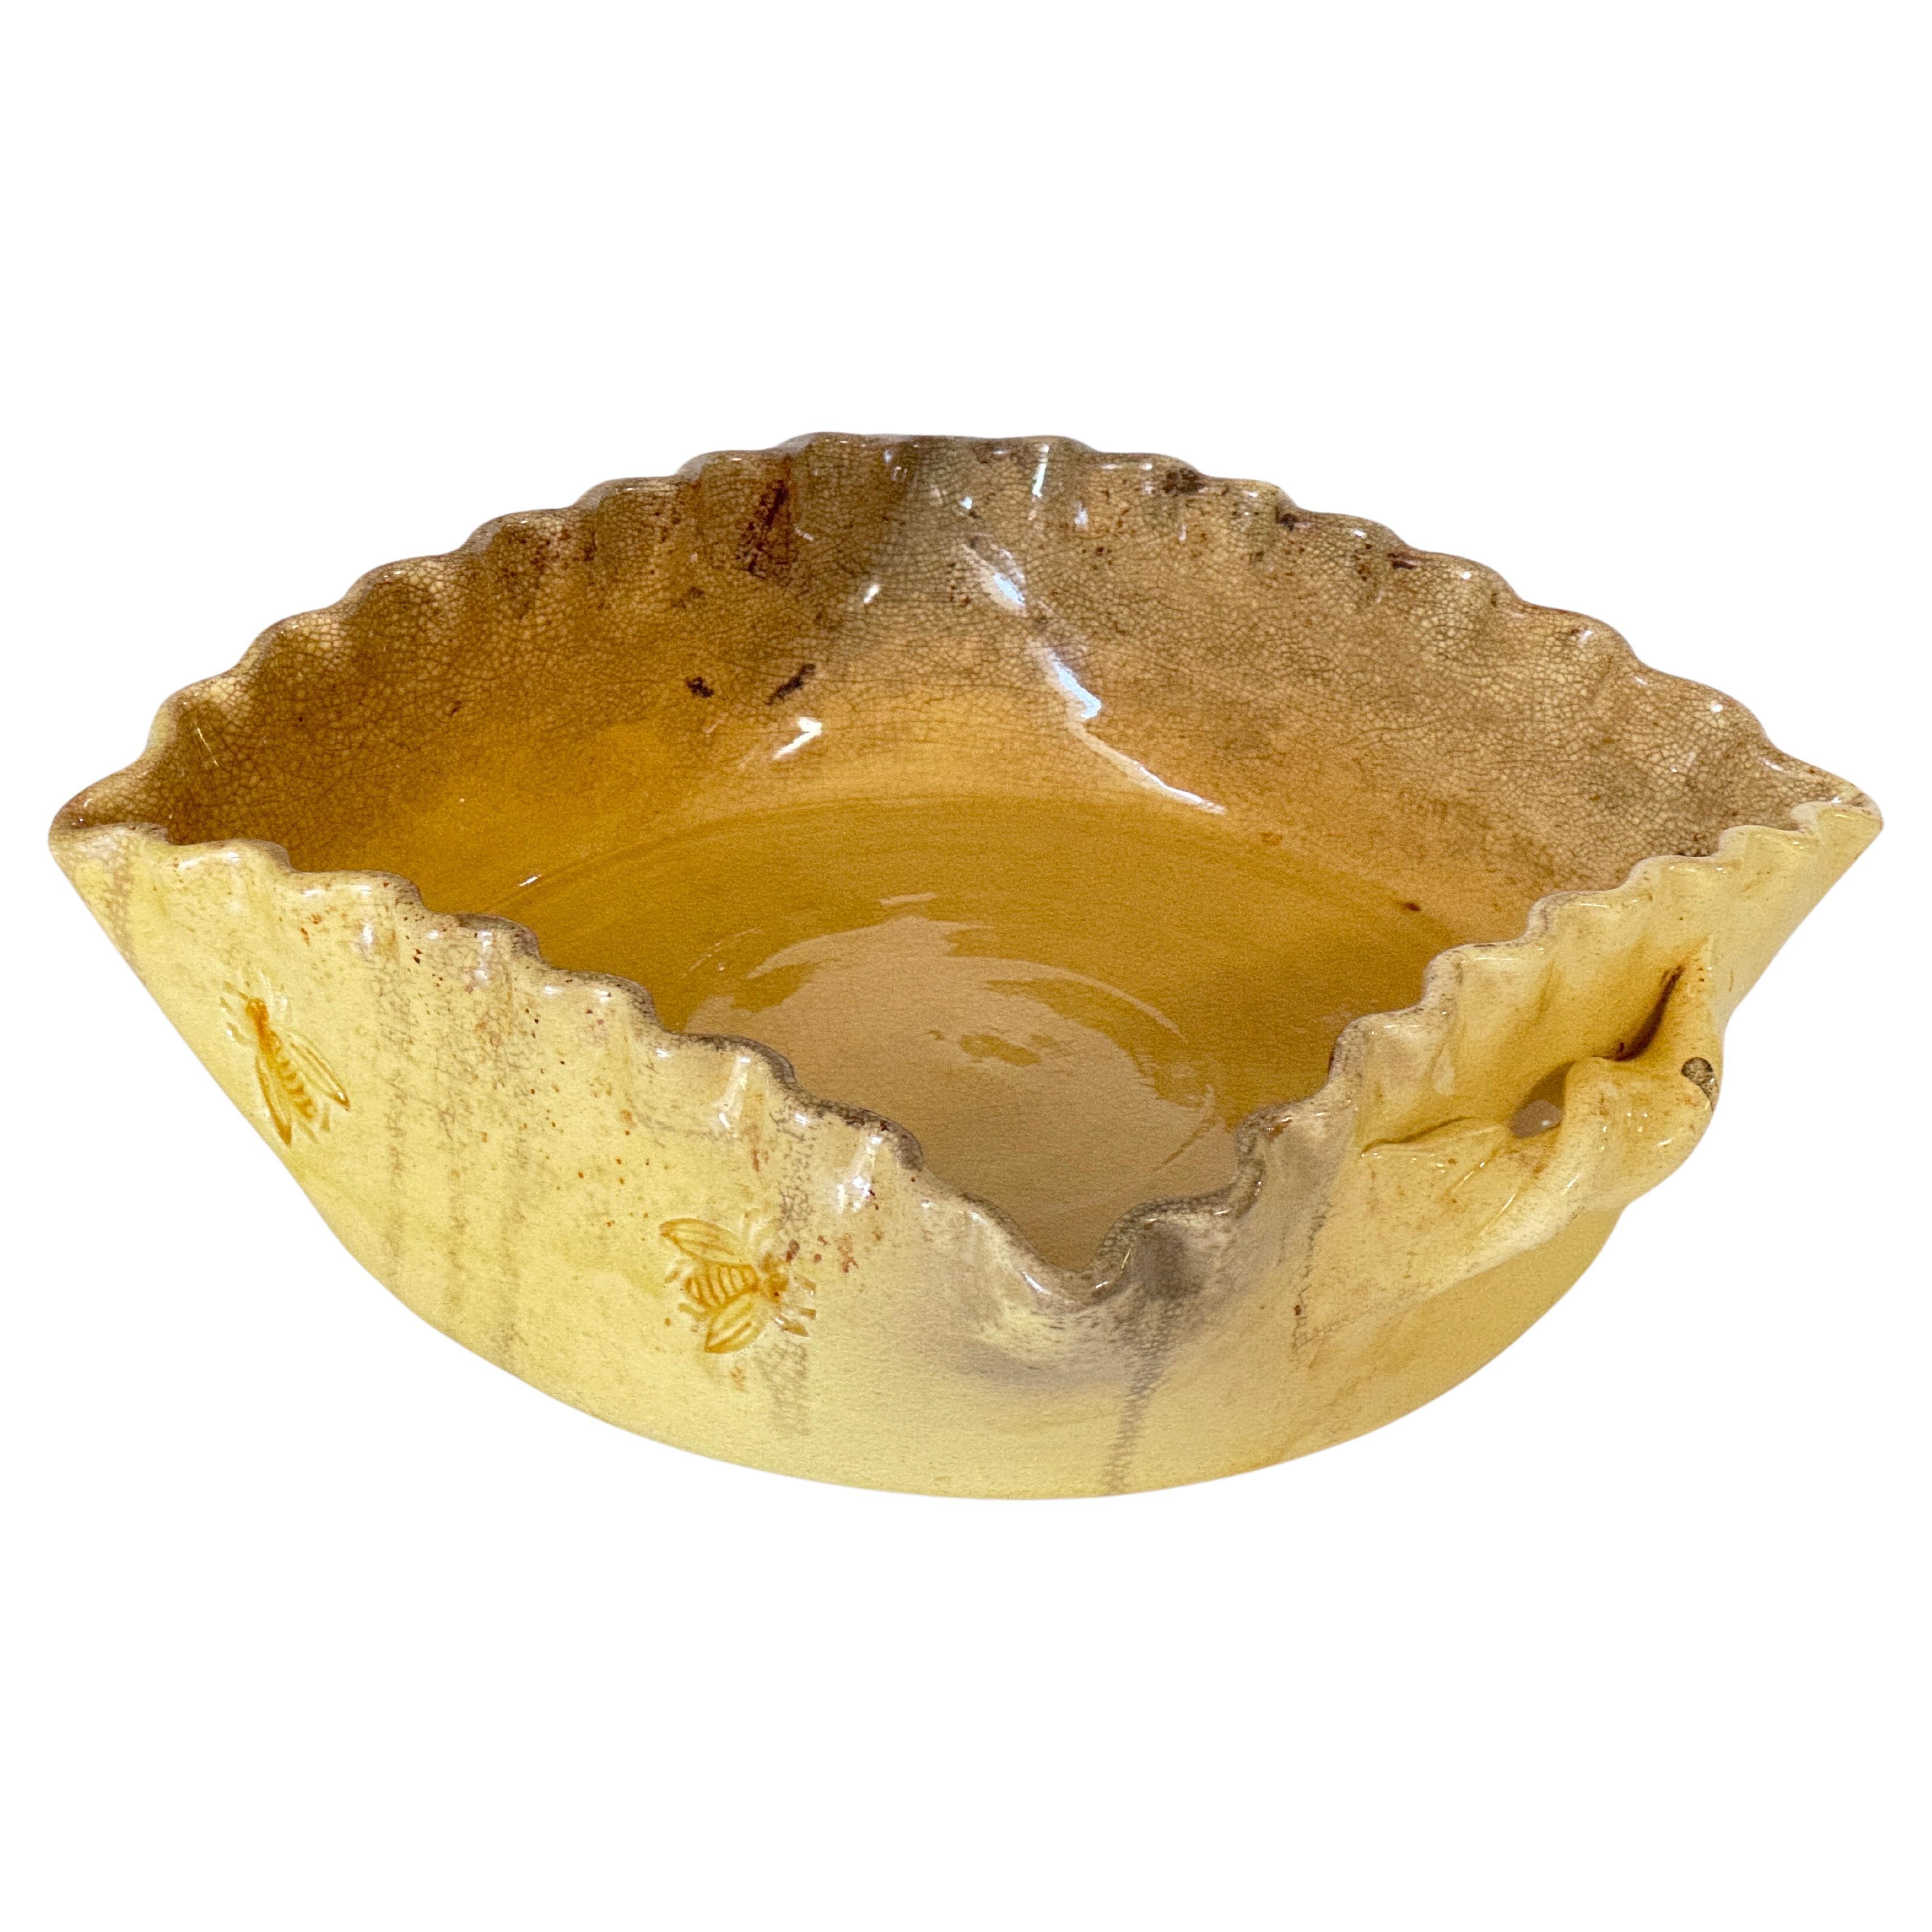 Earthenware oven dish Decorative Dish With bees decoration Yellow Color  For Sale